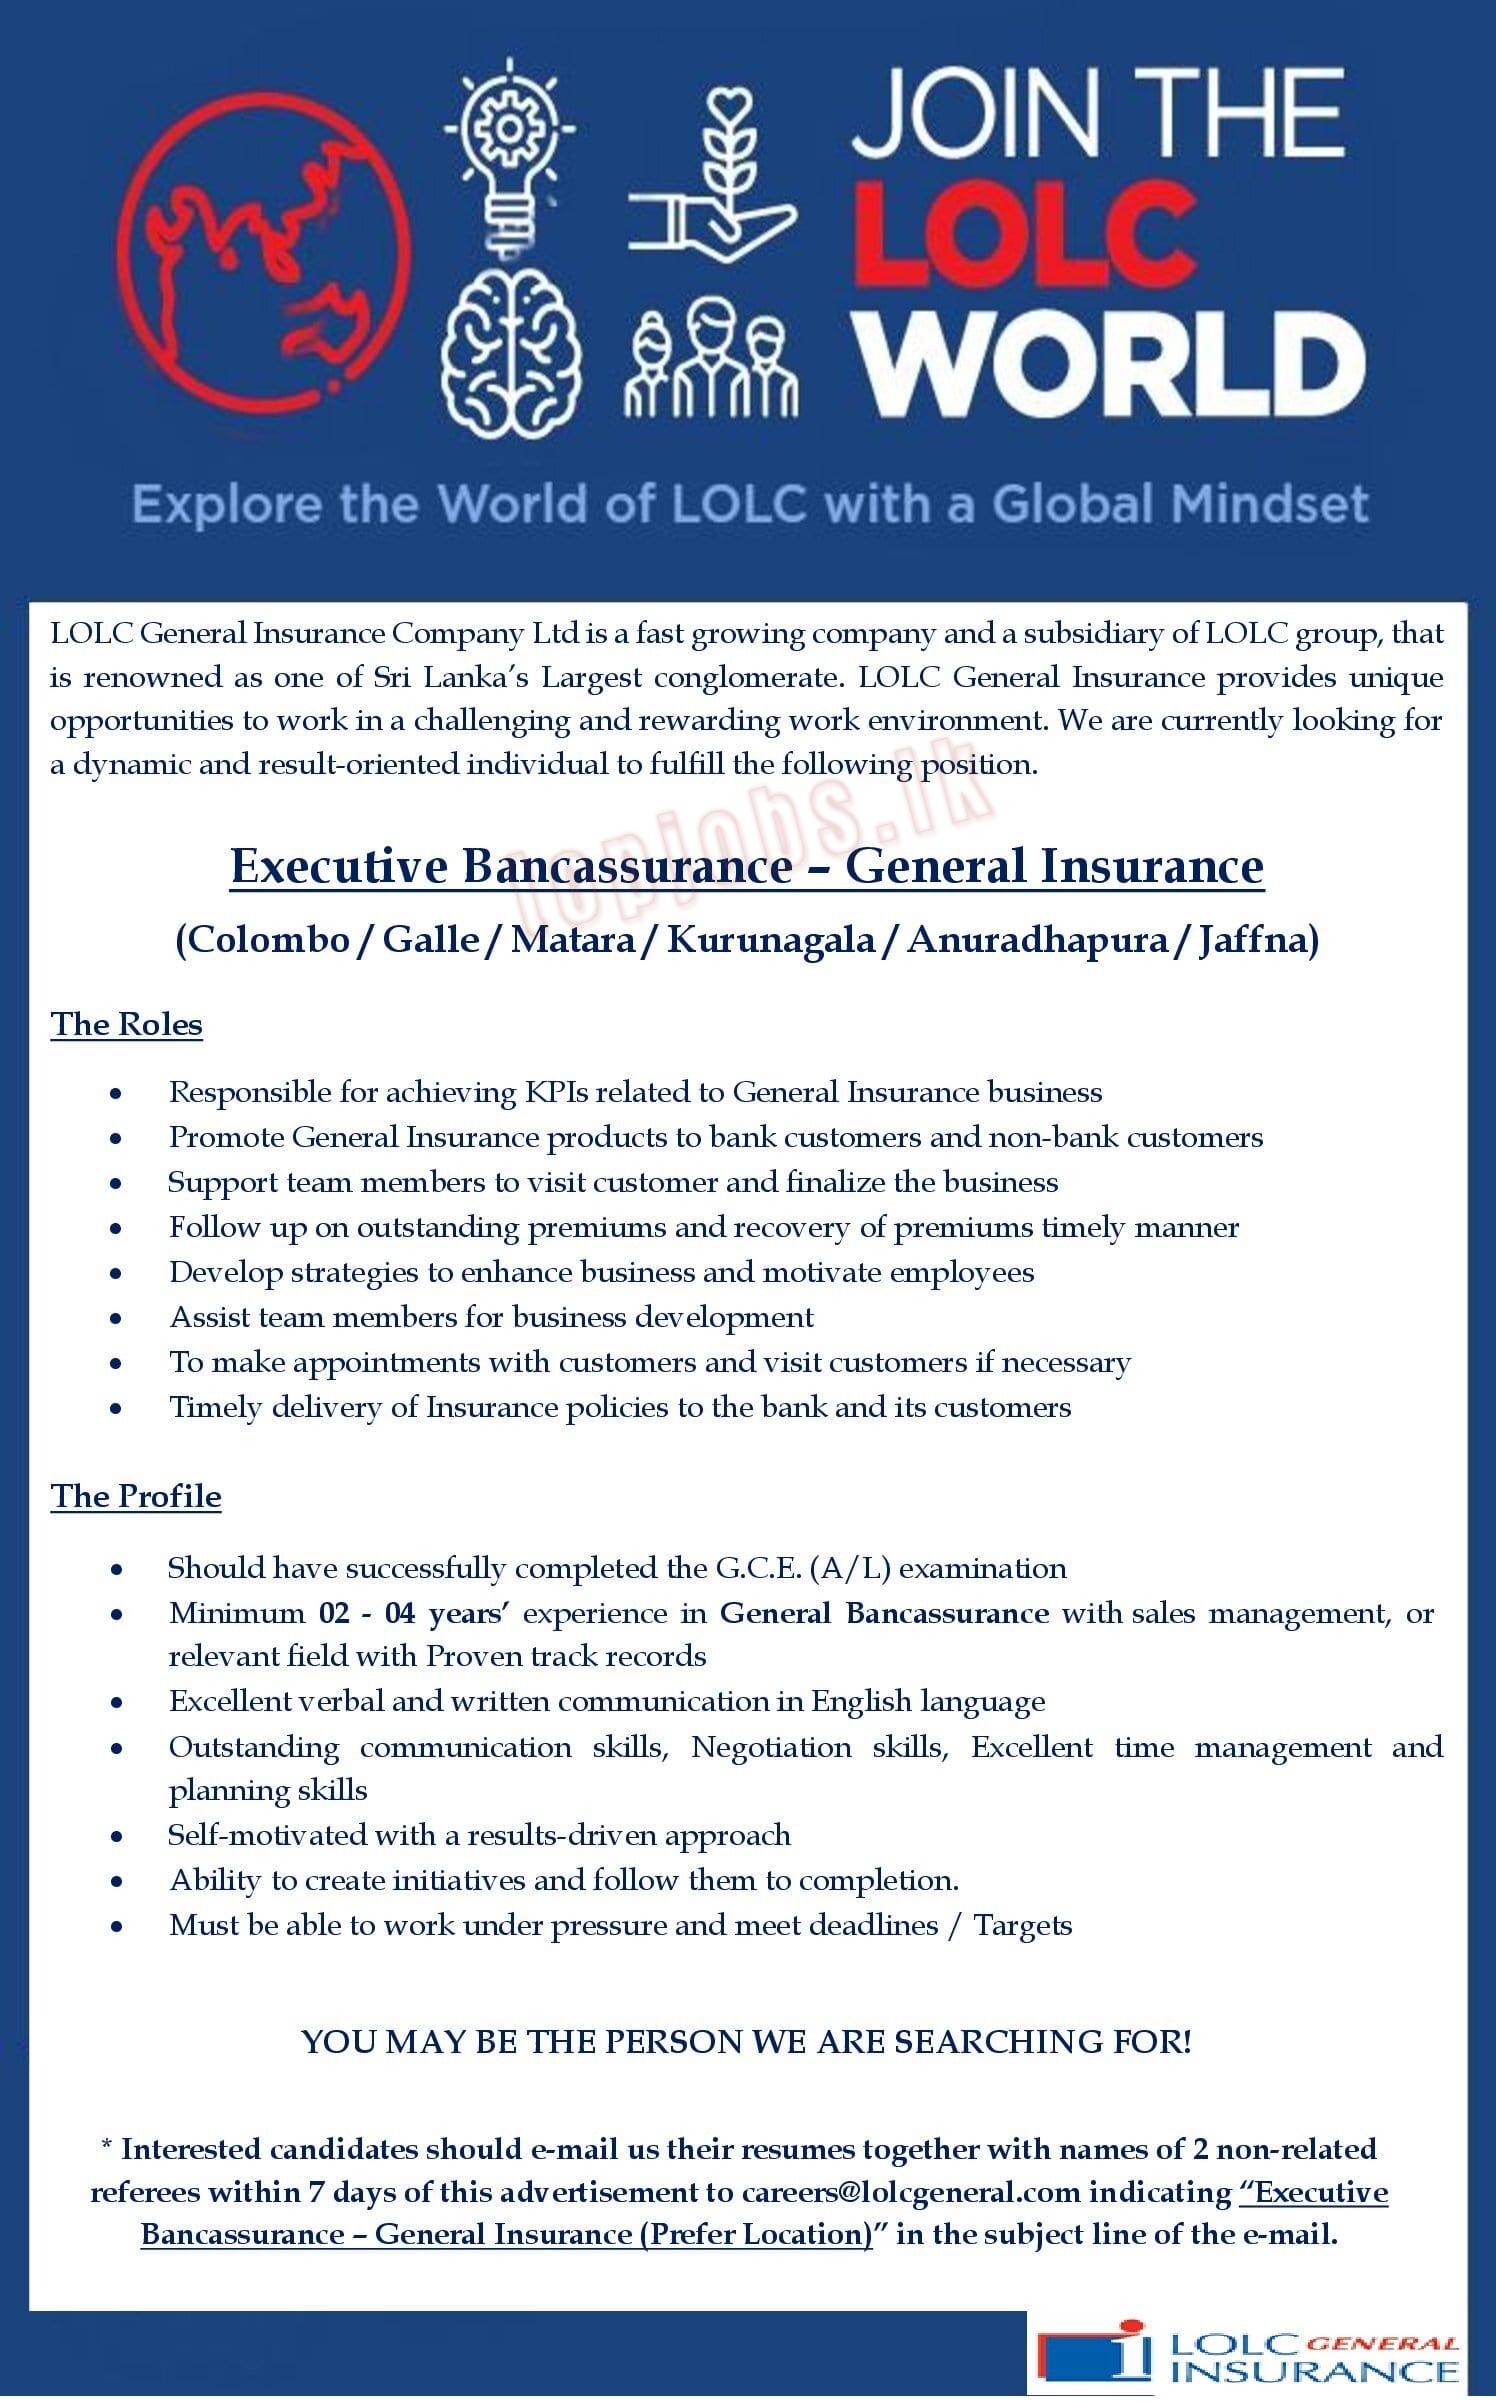 Executive Bancassurance of General Insurance - LOLC Holdings